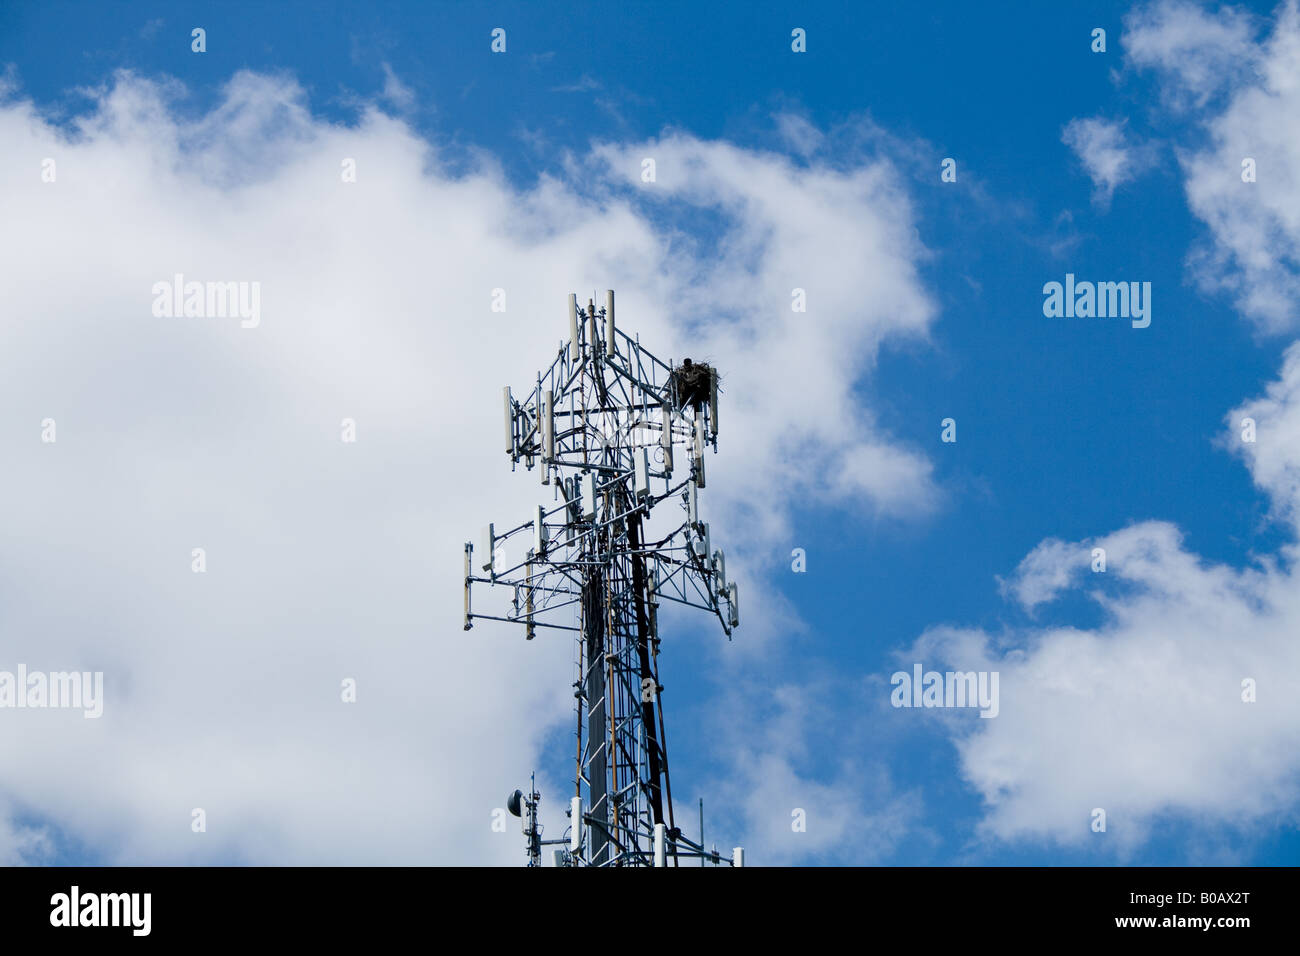 Eagles nest on the top of a communications tower on a bright sunny day Stock Photo